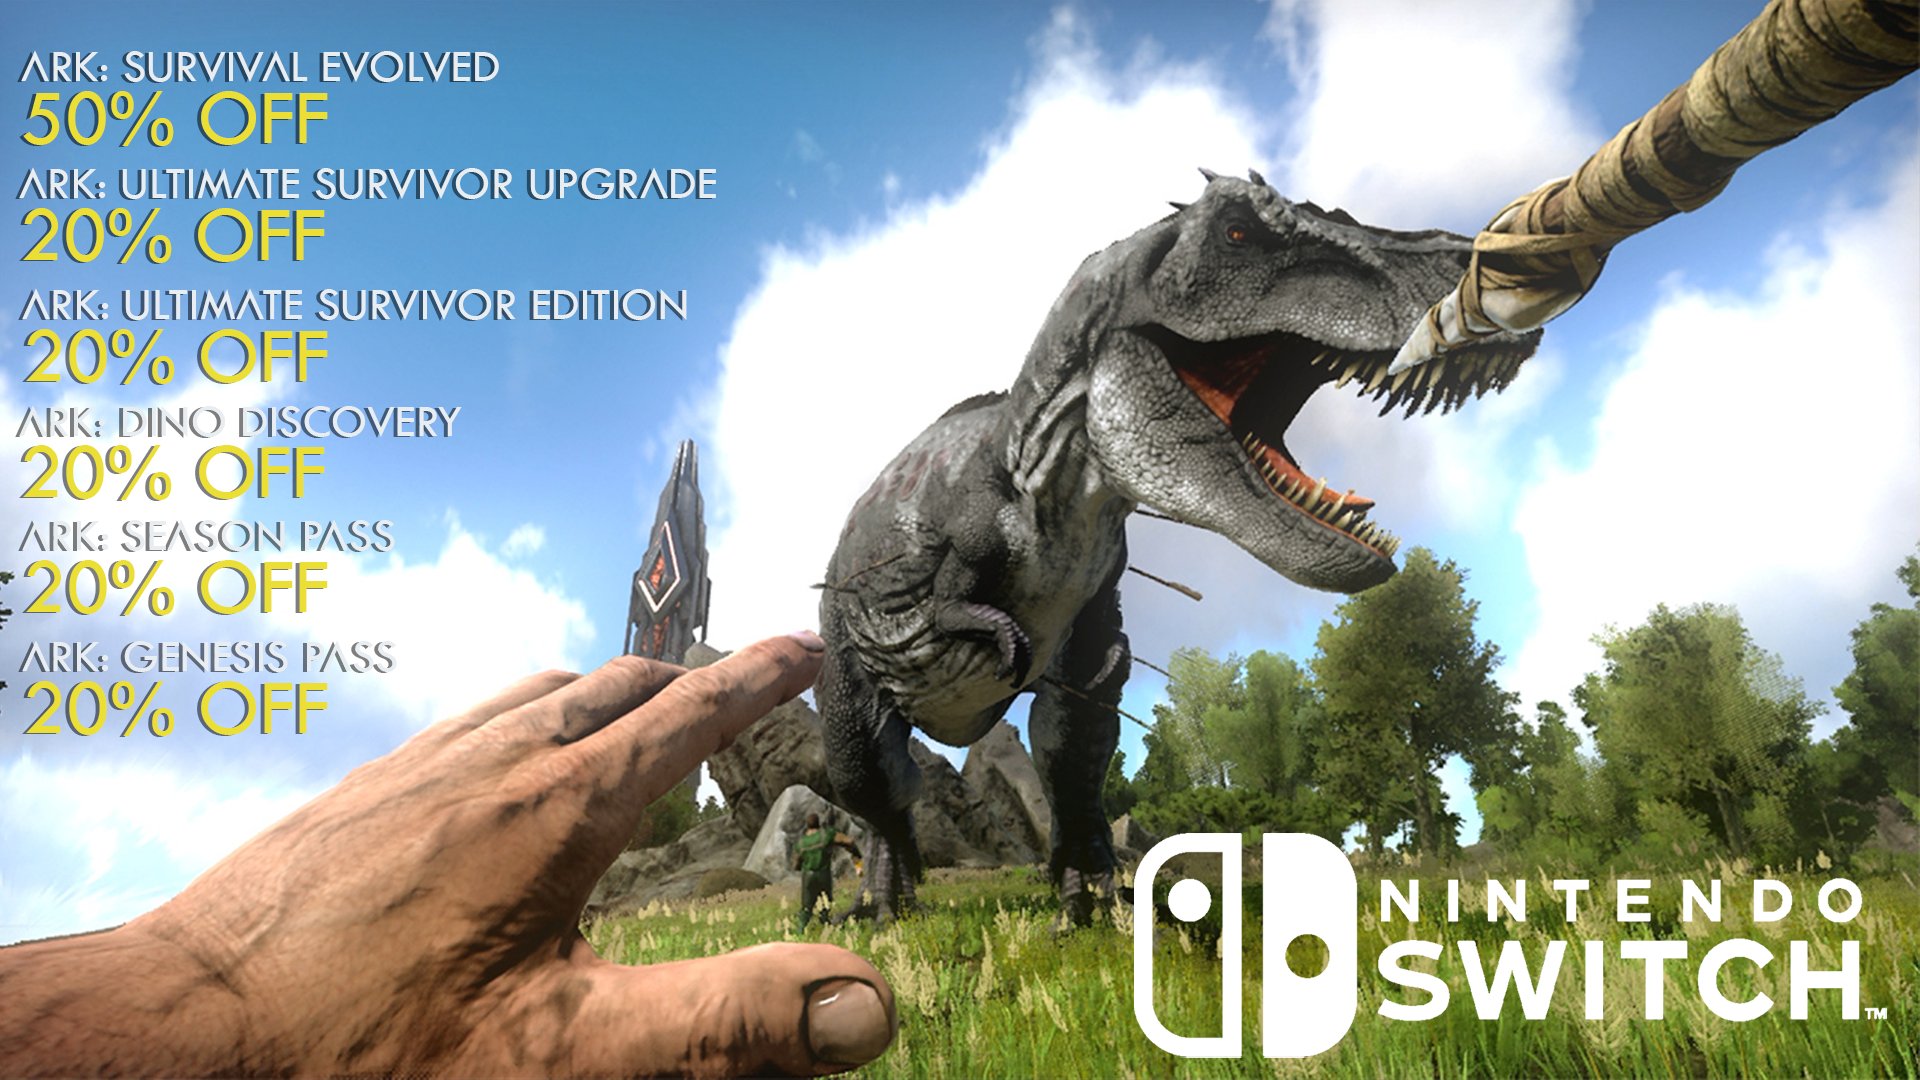 ARK: Survival Evolved on Twitter: searching for the perfect holiday gift? 🎄All ARK content on Nintendo Switch is on sale in Europe &amp; Australia through December https://t.co/0VBESeAPUT" / Twitter